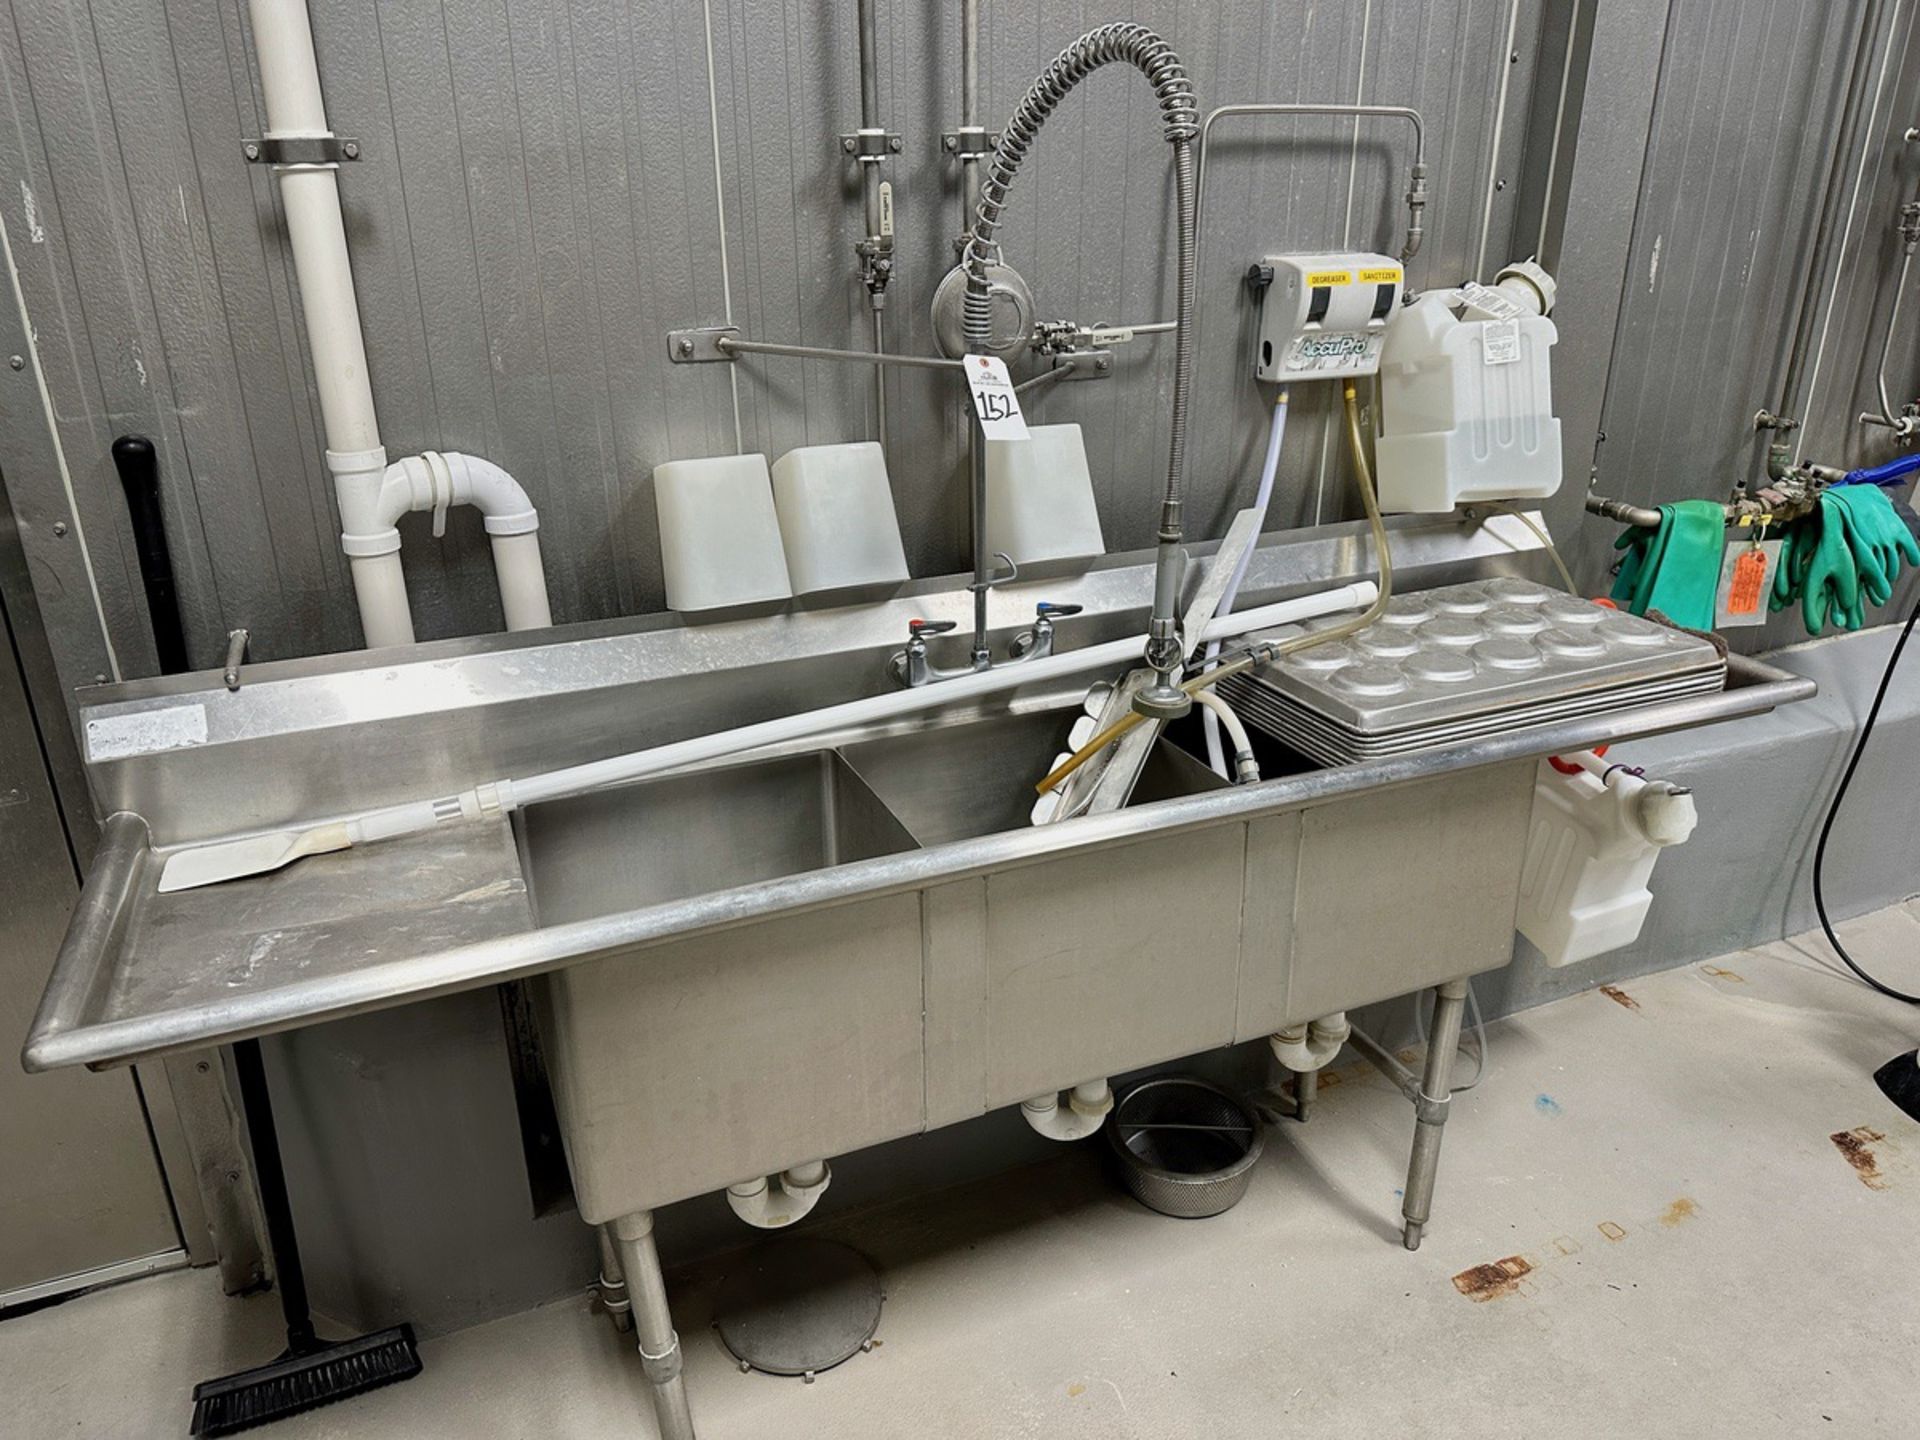 3-Compartment Stainless Steel Sink (Approx. 23" x 8'6") | Rig Fee $150